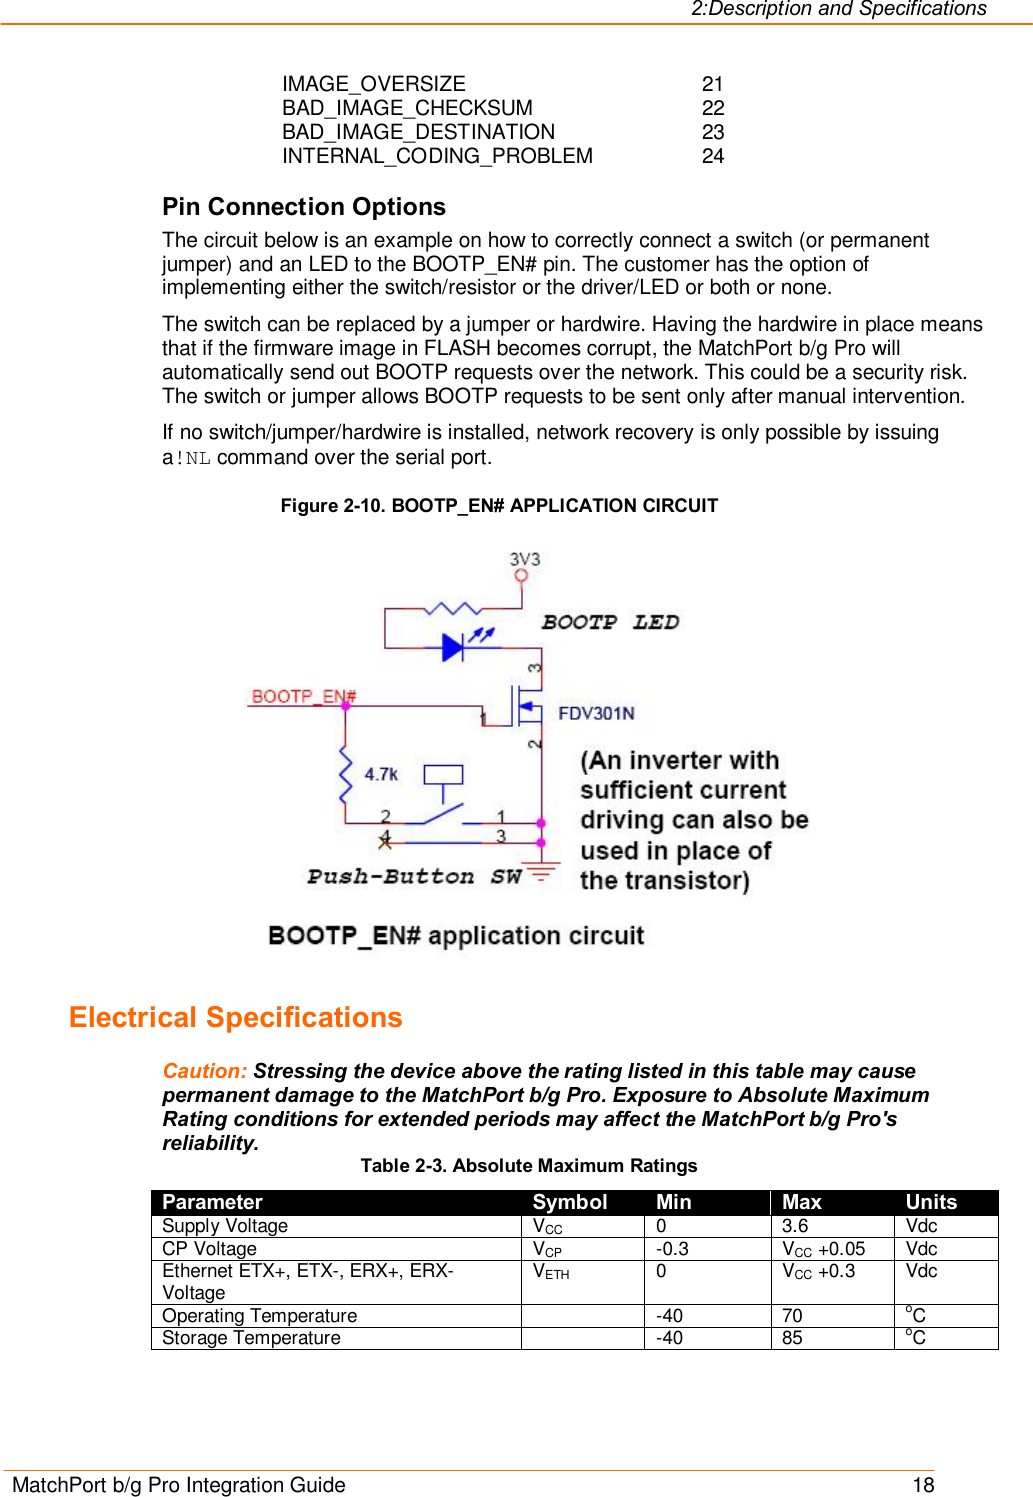 2:Description and Specifications MatchPort b/g Pro Integration Guide    18 IMAGE_OVERSIZE                21 BAD_IMAGE_CHECKSUM            22 BAD_IMAGE_DESTINATION          23 INTERNAL_CODING_PROBLEM         24 Pin Connection Options The circuit below is an example on how to correctly connect a switch (or permanent jumper) and an LED to the BOOTP_EN# pin. The customer has the option of implementing either the switch/resistor or the driver/LED or both or none. The switch can be replaced by a jumper or hardwire. Having the hardwire in place means that if the firmware image in FLASH becomes corrupt, the MatchPort b/g Pro will automatically send out BOOTP requests over the network. This could be a security risk. The switch or jumper allows BOOTP requests to be sent only after manual intervention. If no switch/jumper/hardwire is installed, network recovery is only possible by issuing a!NL command over the serial port. Figure 2-10. BOOTP_EN# APPLICATION CIRCUIT  Electrical Specifications Caution: Stressing the device above the rating listed in this table may cause permanent damage to the MatchPort b/g Pro. Exposure to Absolute Maximum Rating conditions for extended periods may affect the MatchPort b/g Pro&apos;s reliability. Table 2-3. Absolute Maximum Ratings Parameter Symbol Min Max Units Supply Voltage  VCC  0  3.6  Vdc CP Voltage  VCP  -0.3  VCC +0.05  Vdc Ethernet ETX+, ETX-, ERX+, ERX-Voltage  VETH  0  VCC +0.3  Vdc Operating Temperature    -40  70  oC Storage Temperature    -40  85  oC 